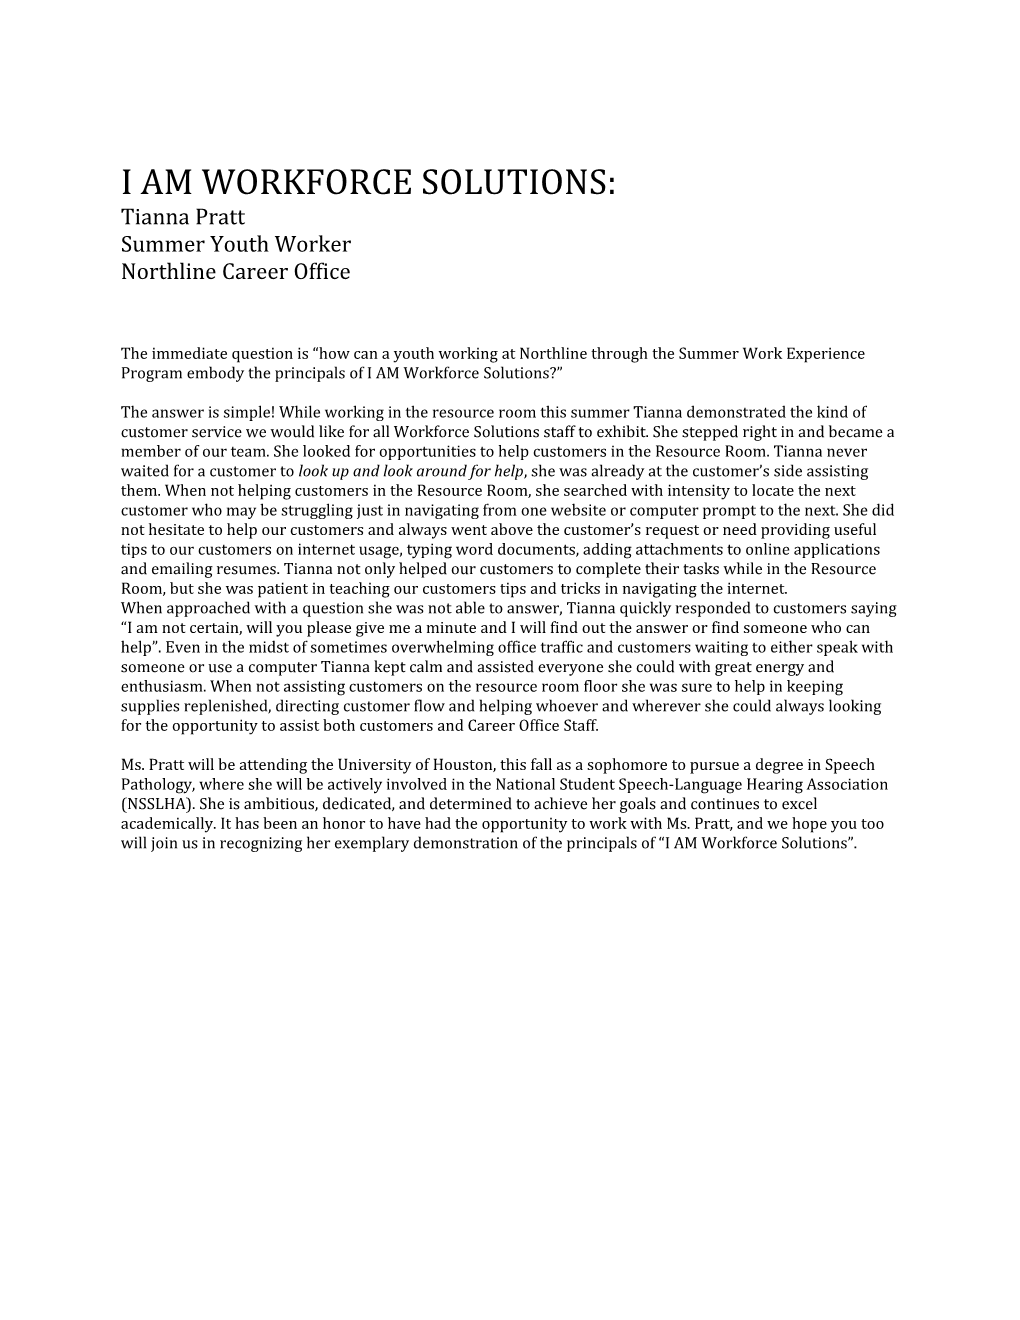 I Am Workforce Solutions